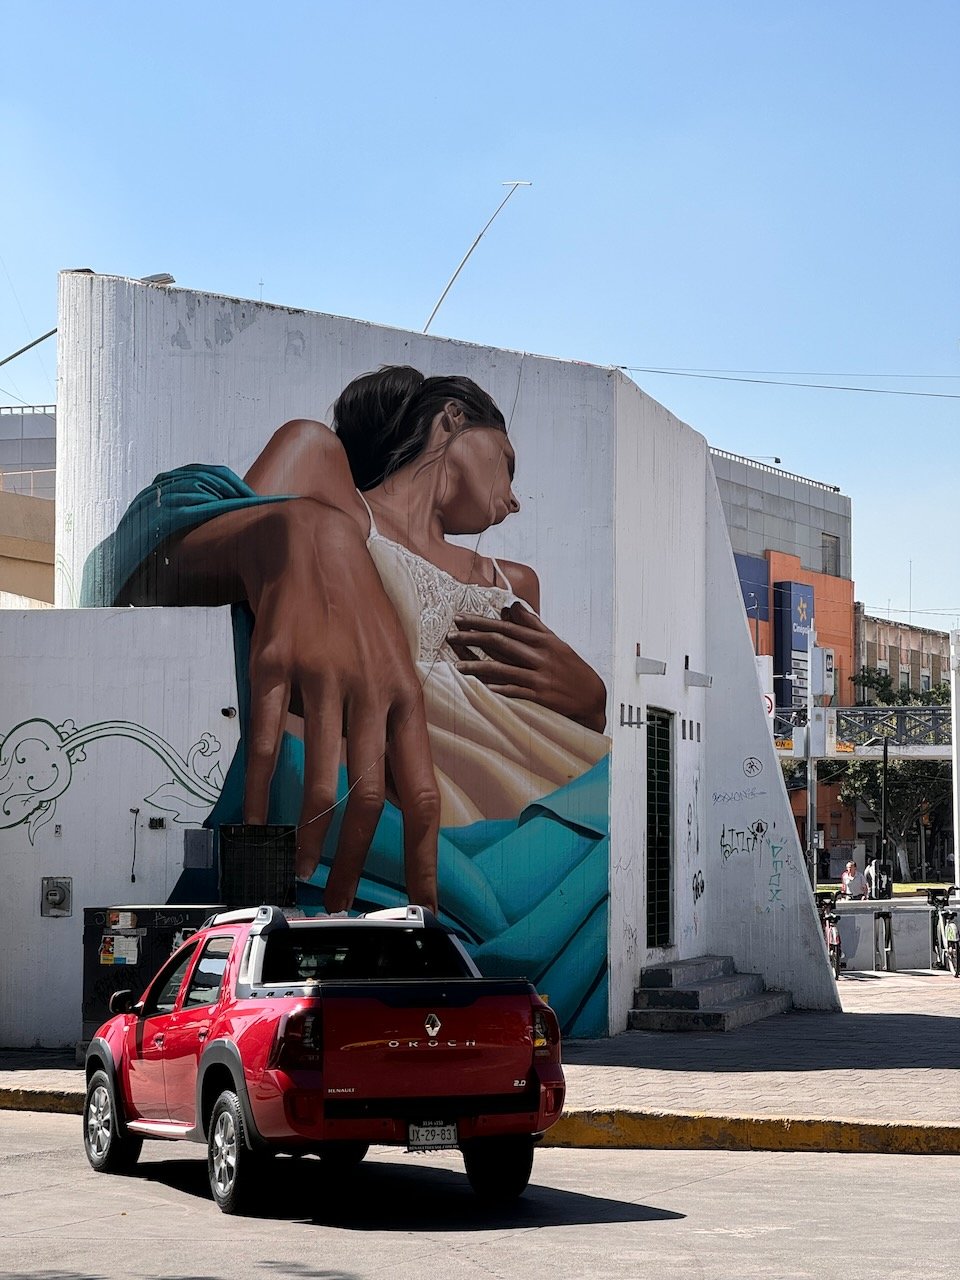 A mural on the street near the center of Guadalajara